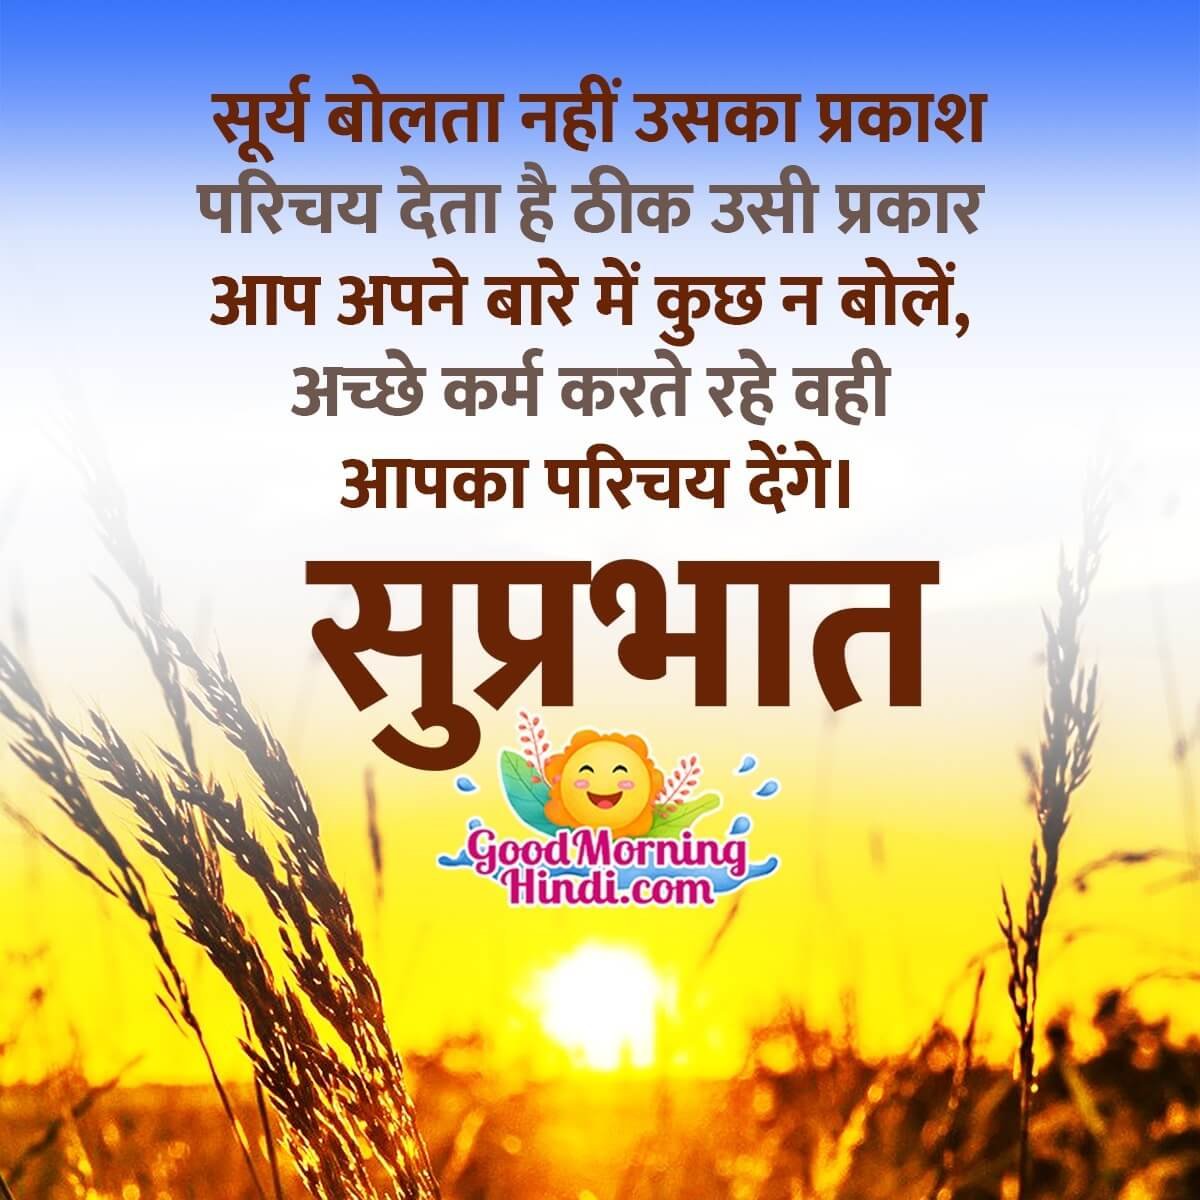 Best Good Morning Messages In Hindi - Good Morning Wishes & Images ...